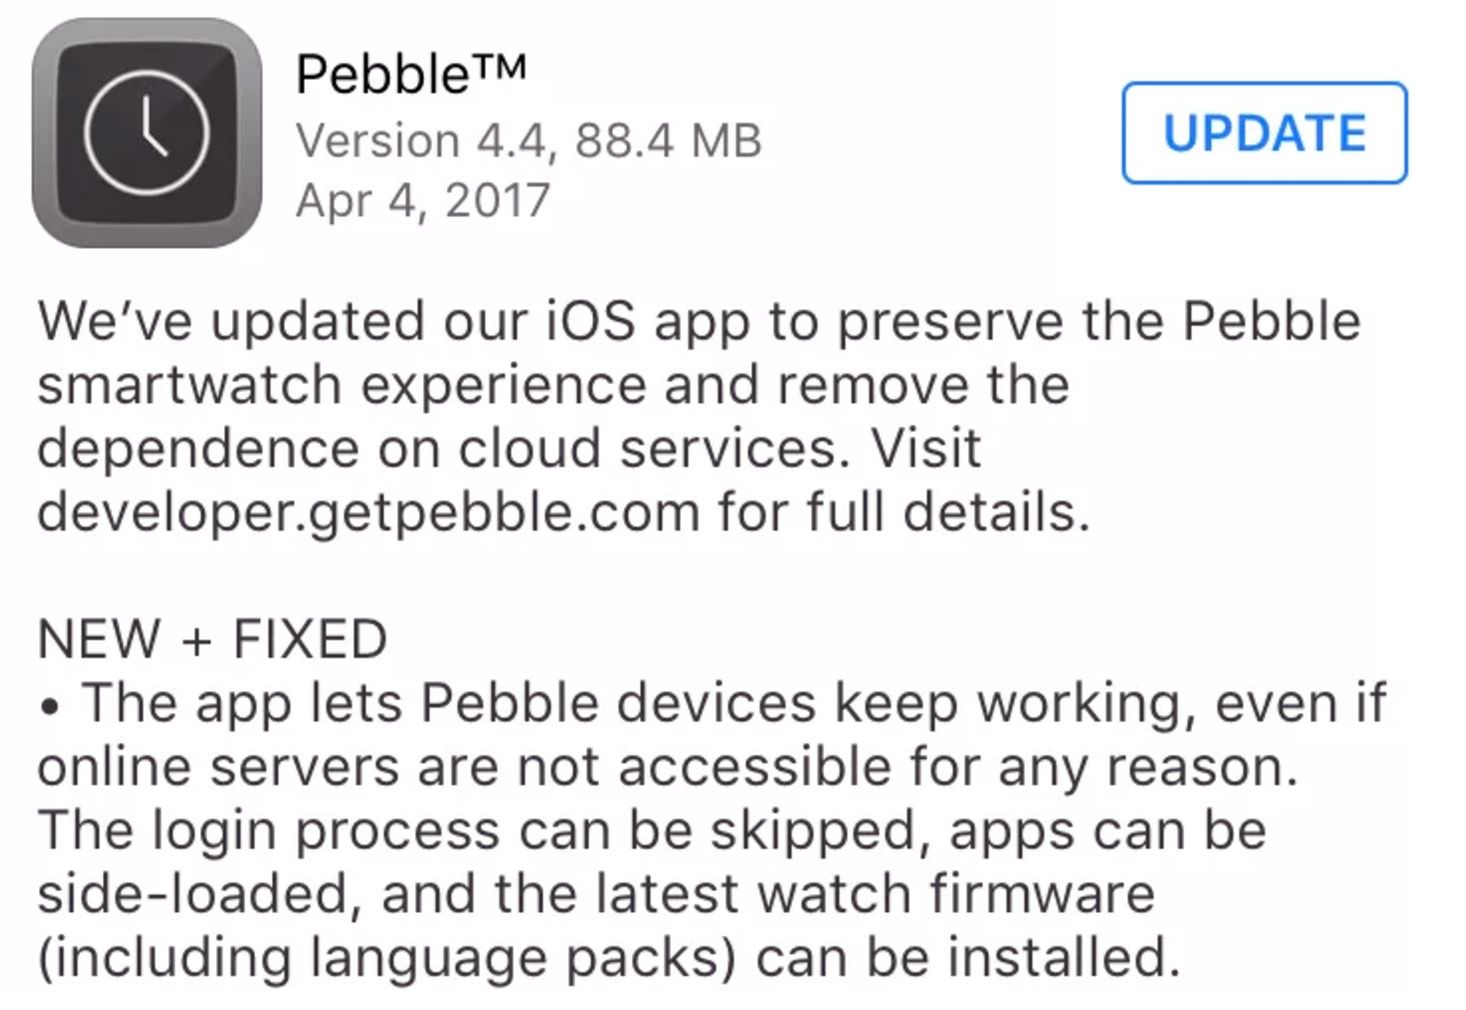 pebble app update allows watches to kind of still work after fitbit sale image 2